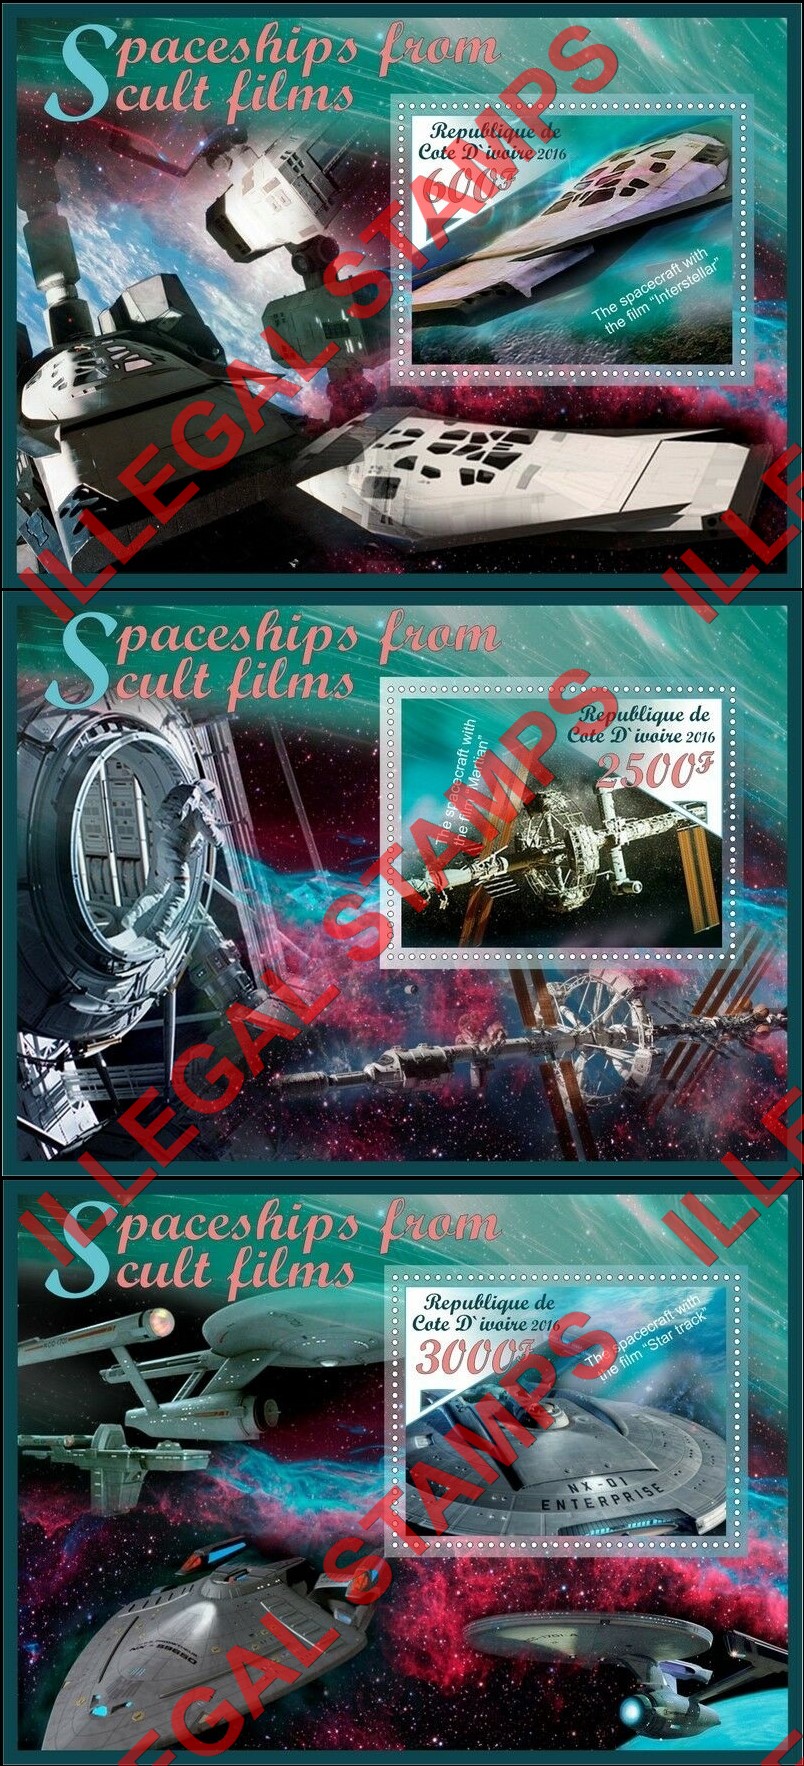 Djibouti 2016 Spaceships From Cult Films Illegal Stamp Souvenir Sheets of 1 (Part 2)